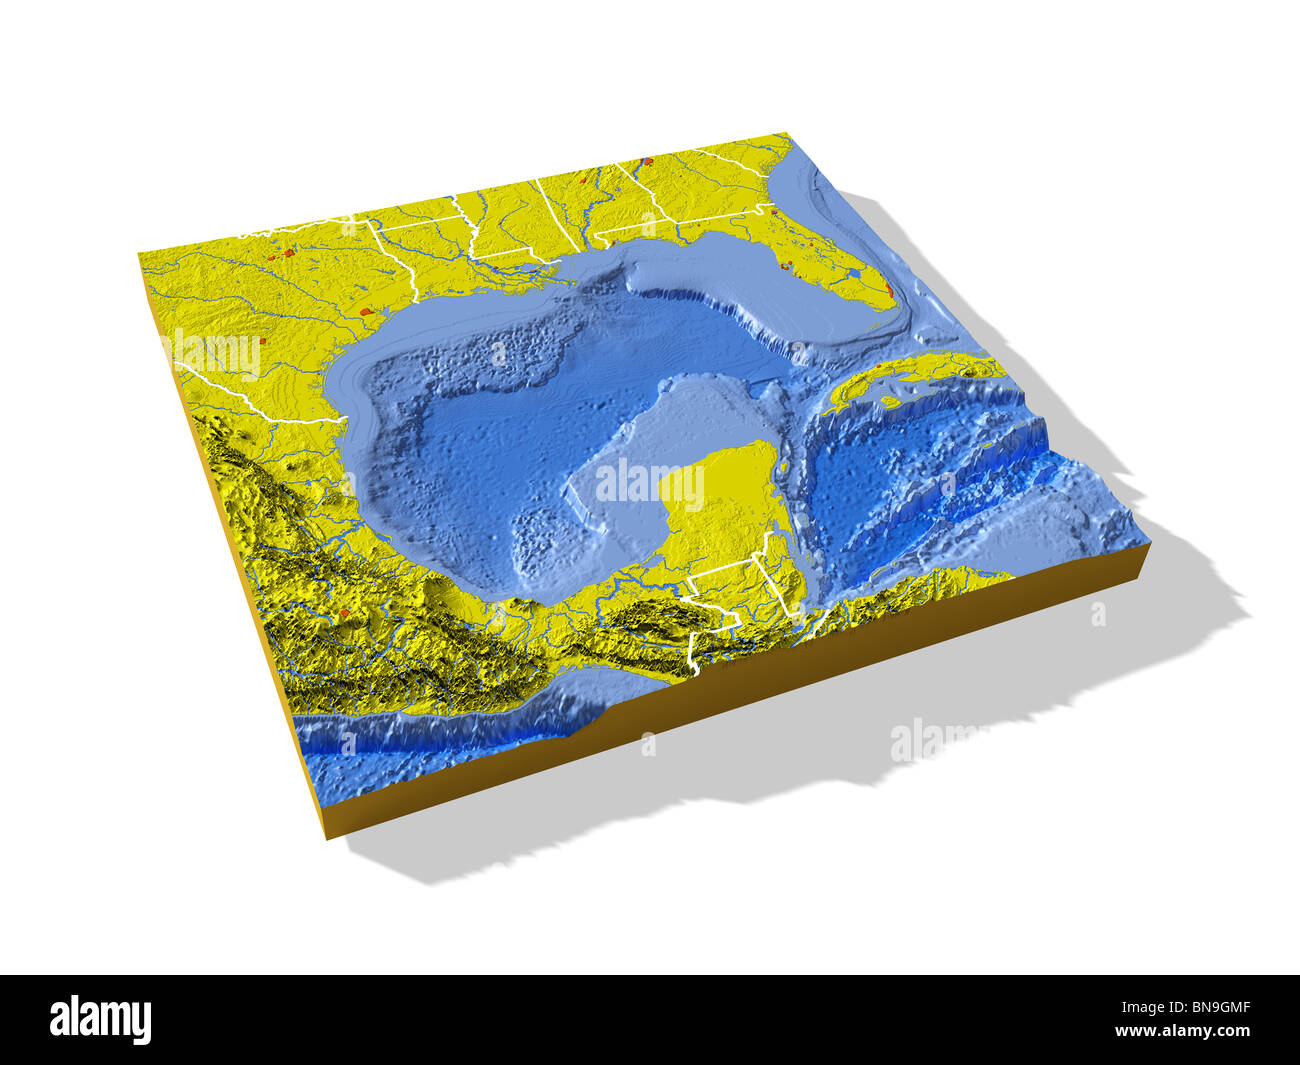 Gulf of Mexico, 3D relief map with urban areas and borders. Stock Photo